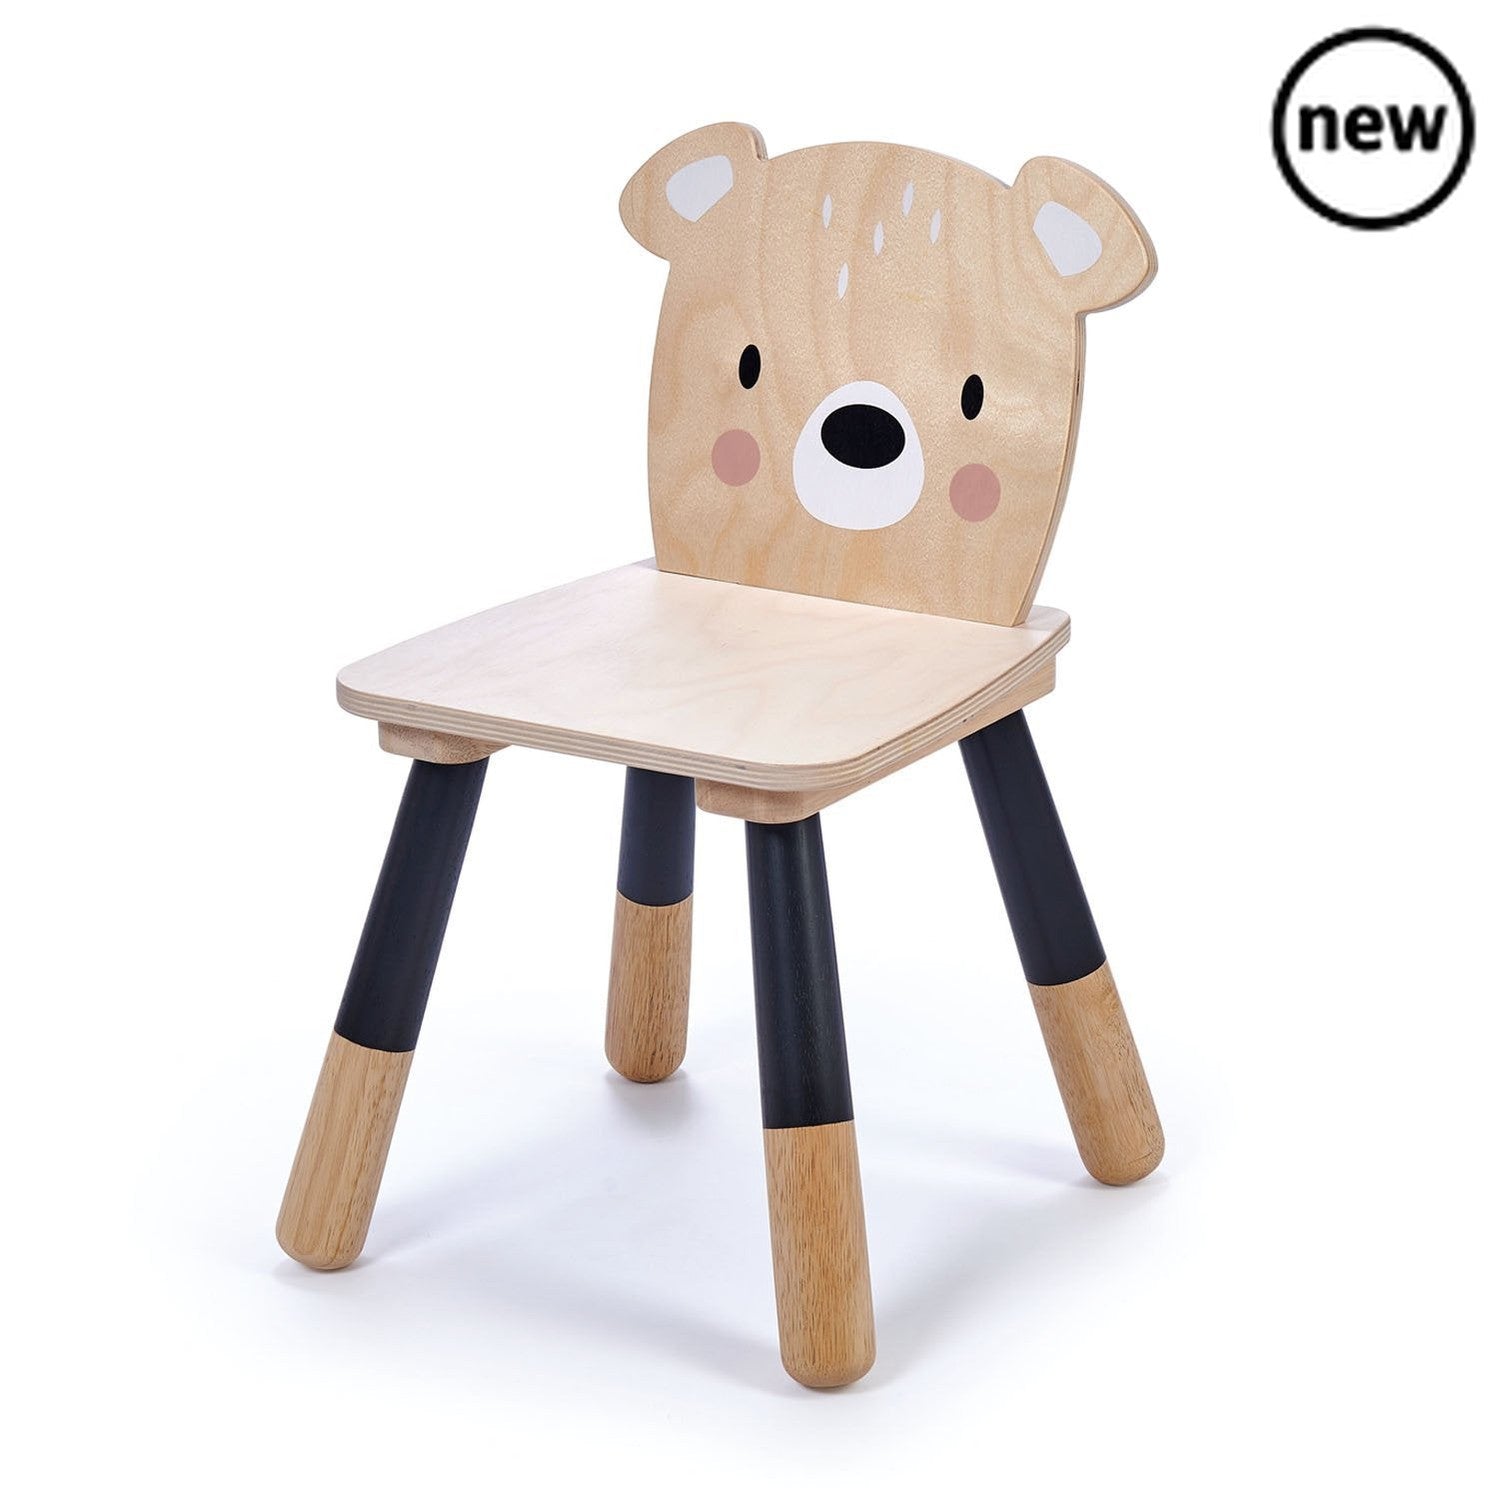 Tenderleaf Toys Wooden Forest Bear Chair, Look for the bear necessities the simple bear necessities..... This fun high quality plywood Bear chair by Tender Leaf Toys works perfectly with the Tender Leaf Toys Forest table, or your own small table. Children will love sitting in this very cool bear chair! Self Assembly 32 x 30 x 48cm, Tenderleaf Toys Wooden Forest Bear Chair,Wooden Toys,Tenderleaf, 